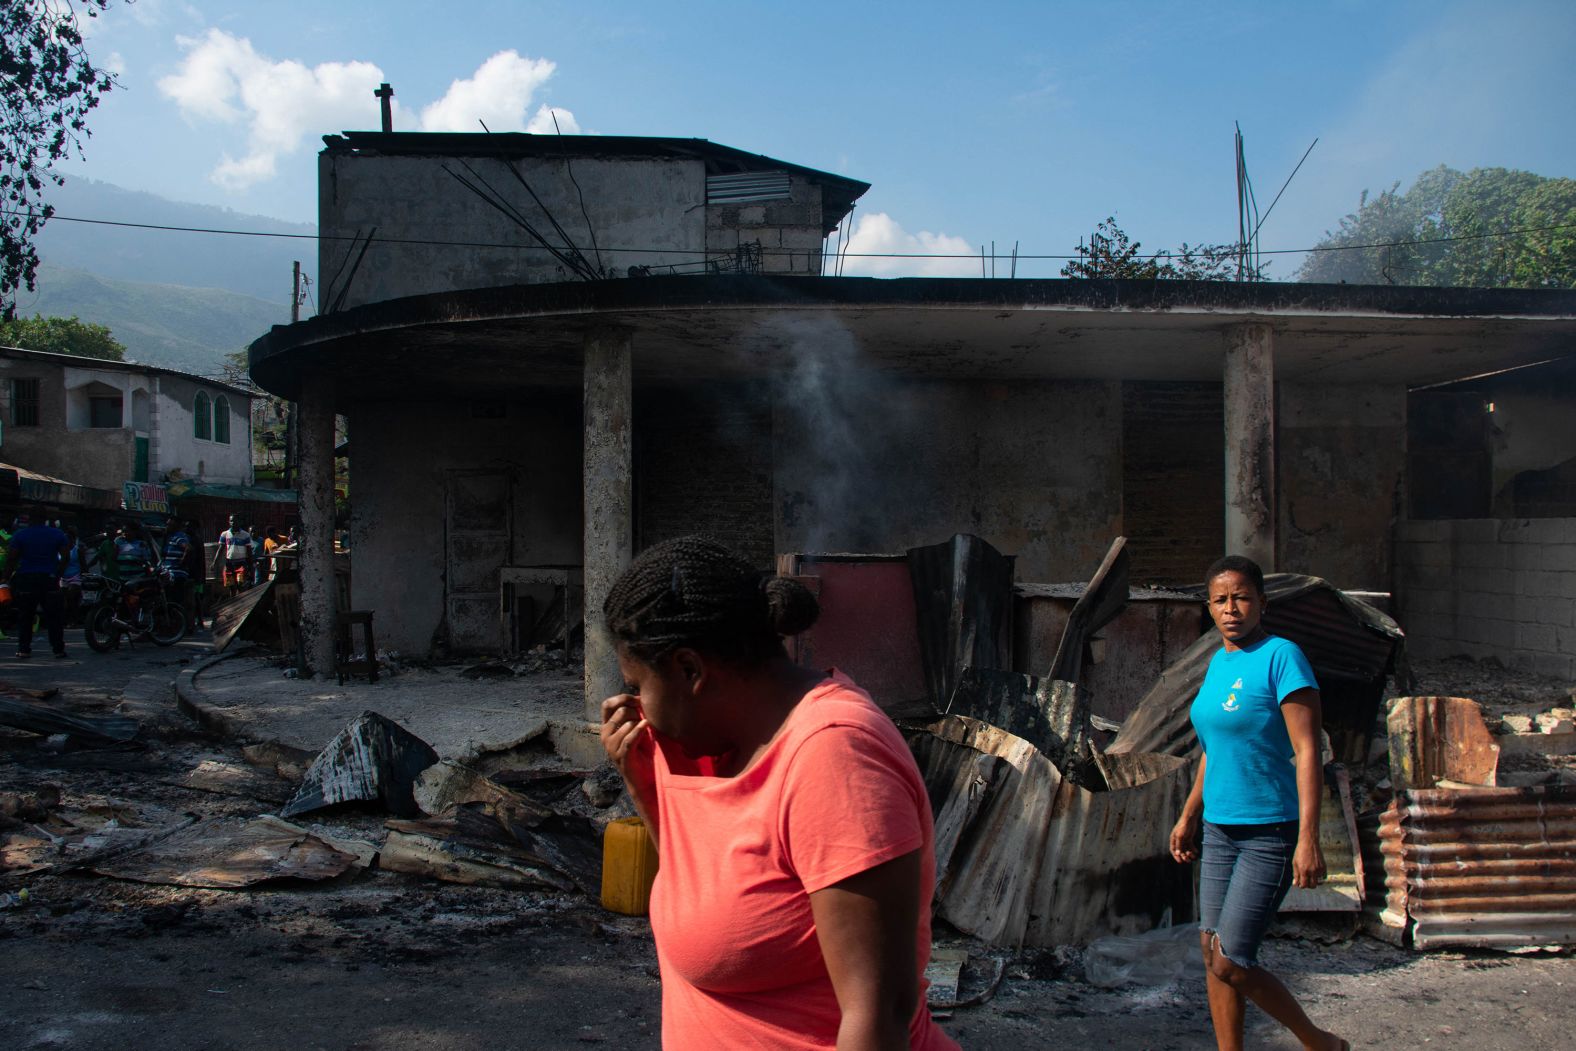 A woman cries as she walks near her husband's shop that was set on fire by armed gang members in Port-au-Prince, Haiti, on Thursday, March 7. <a href="index.php?page=&url=https%3A%2F%2Fwww.cnn.com%2Finteractive%2F2024%2F03%2Fworld%2Fhaiti-gang-violence-cnnphotos%2F" target="_blank">Gangs control 80% of the Haitian capital</a>, the UN estimates, and continue to fight for the rest. Haiti's government <a href="index.php?page=&url=https%3A%2F%2Fwww.cnn.com%2F2024%2F03%2F02%2Famericas%2Fprisoners-escape-port-au-prince-prison-haiti-intl-hnk%2Findex.html" target="_blank">declared a state of emergency</a> on Sunday.